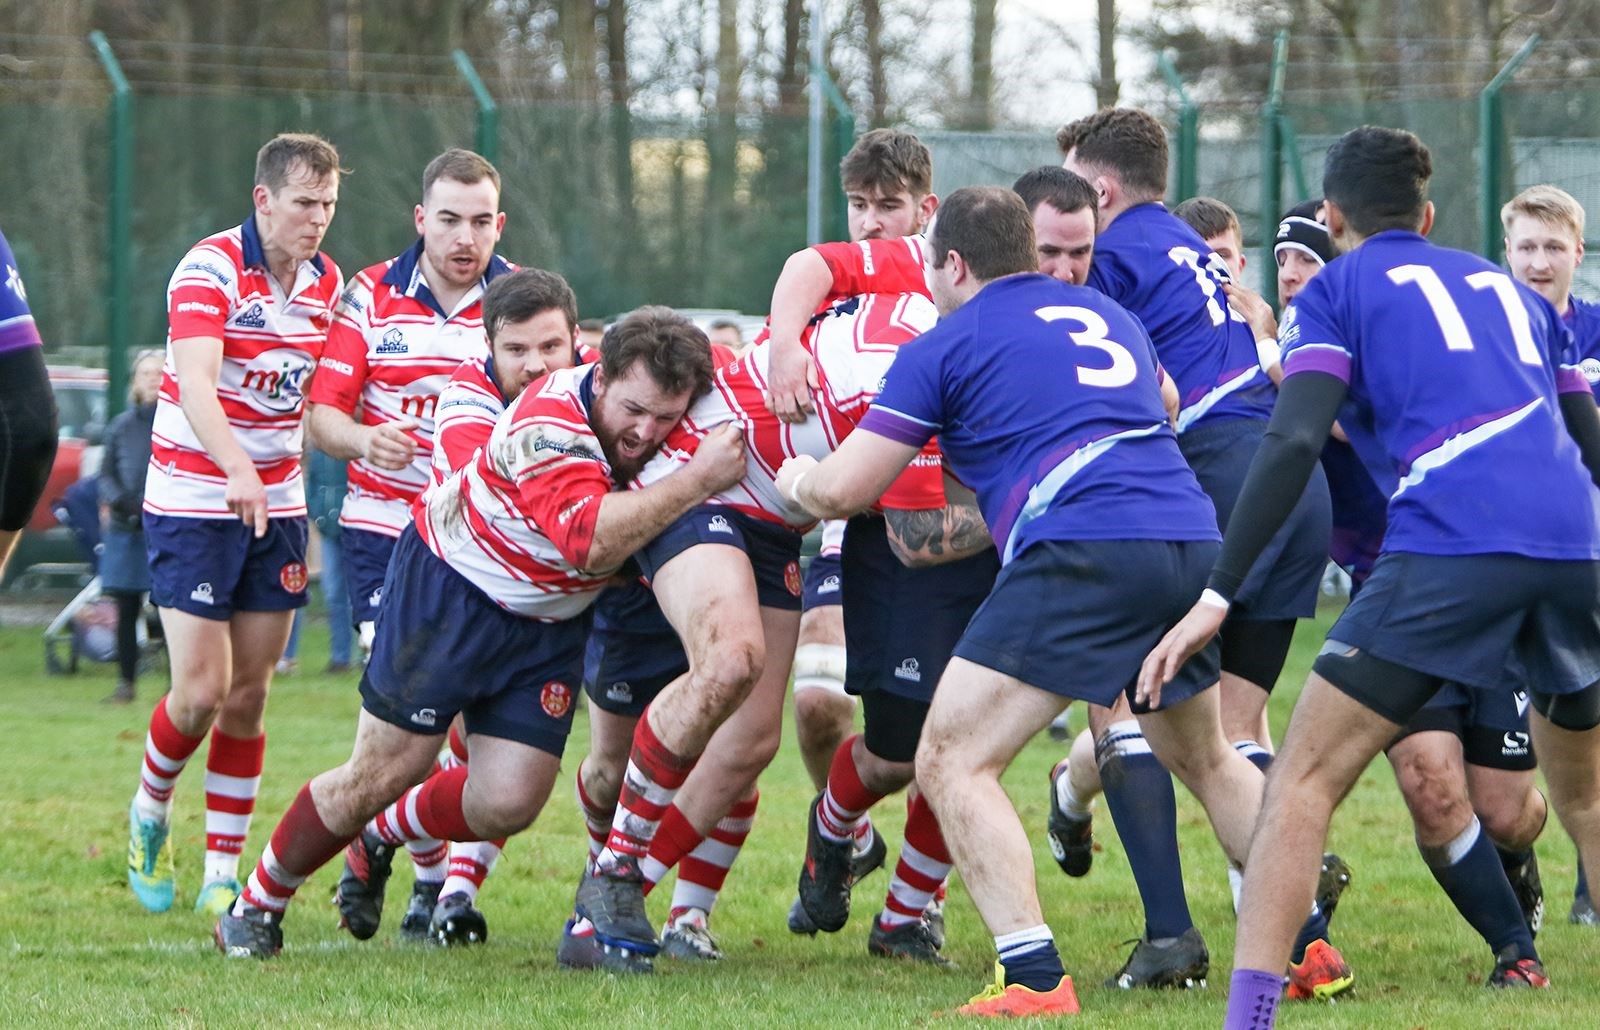 Moray maul drive. Cameron Ireland coordinating from back. Picture: John MacGregor